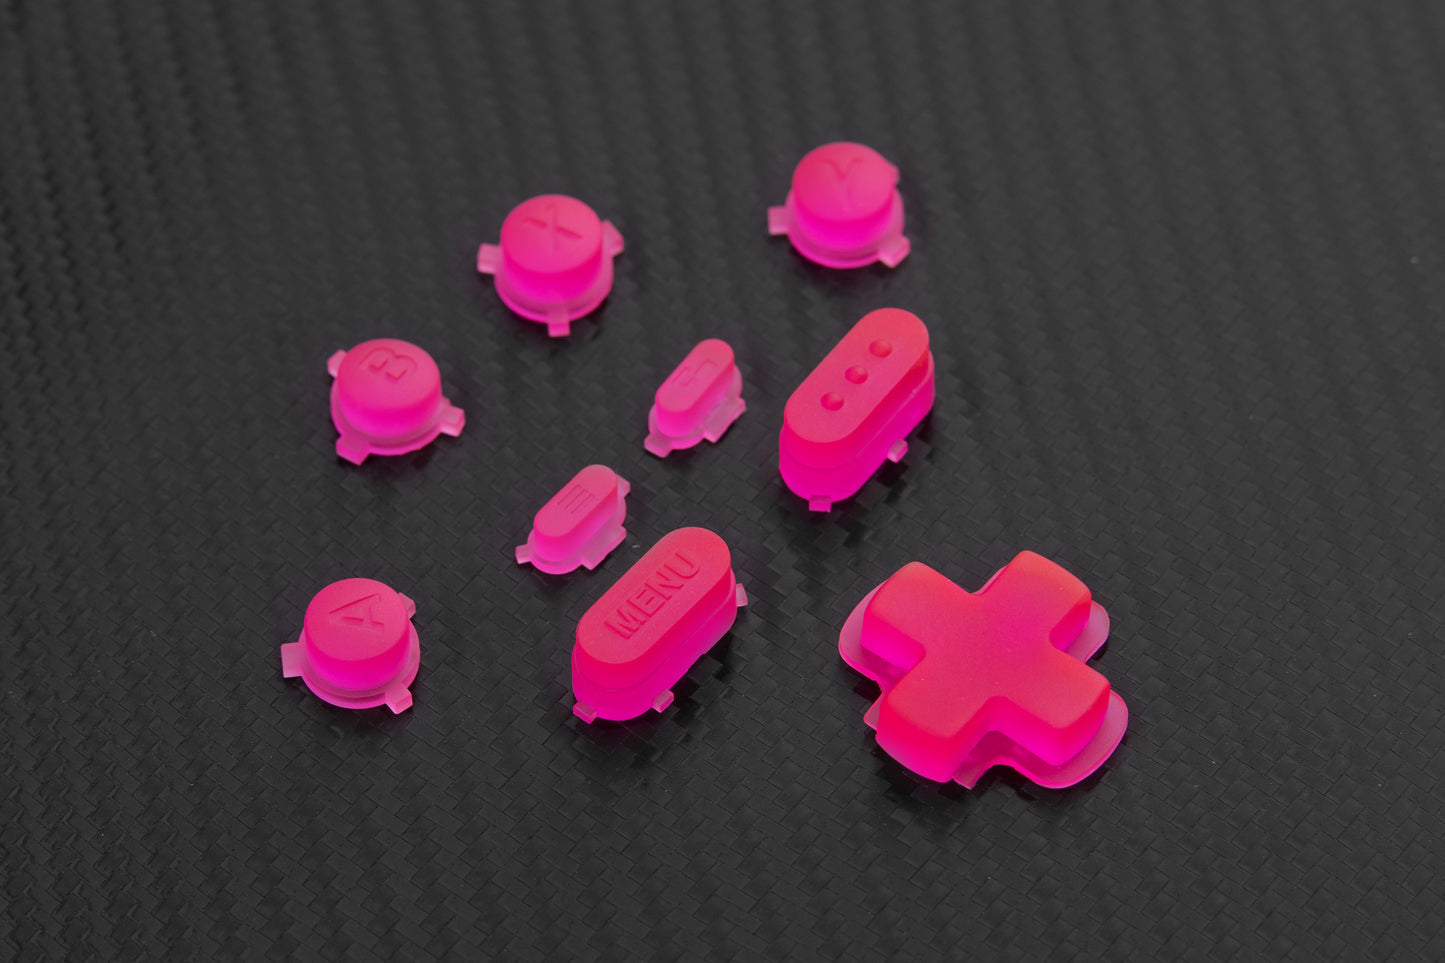 Steam deck butons in bright transparent neon Pink. Carbon fiber background